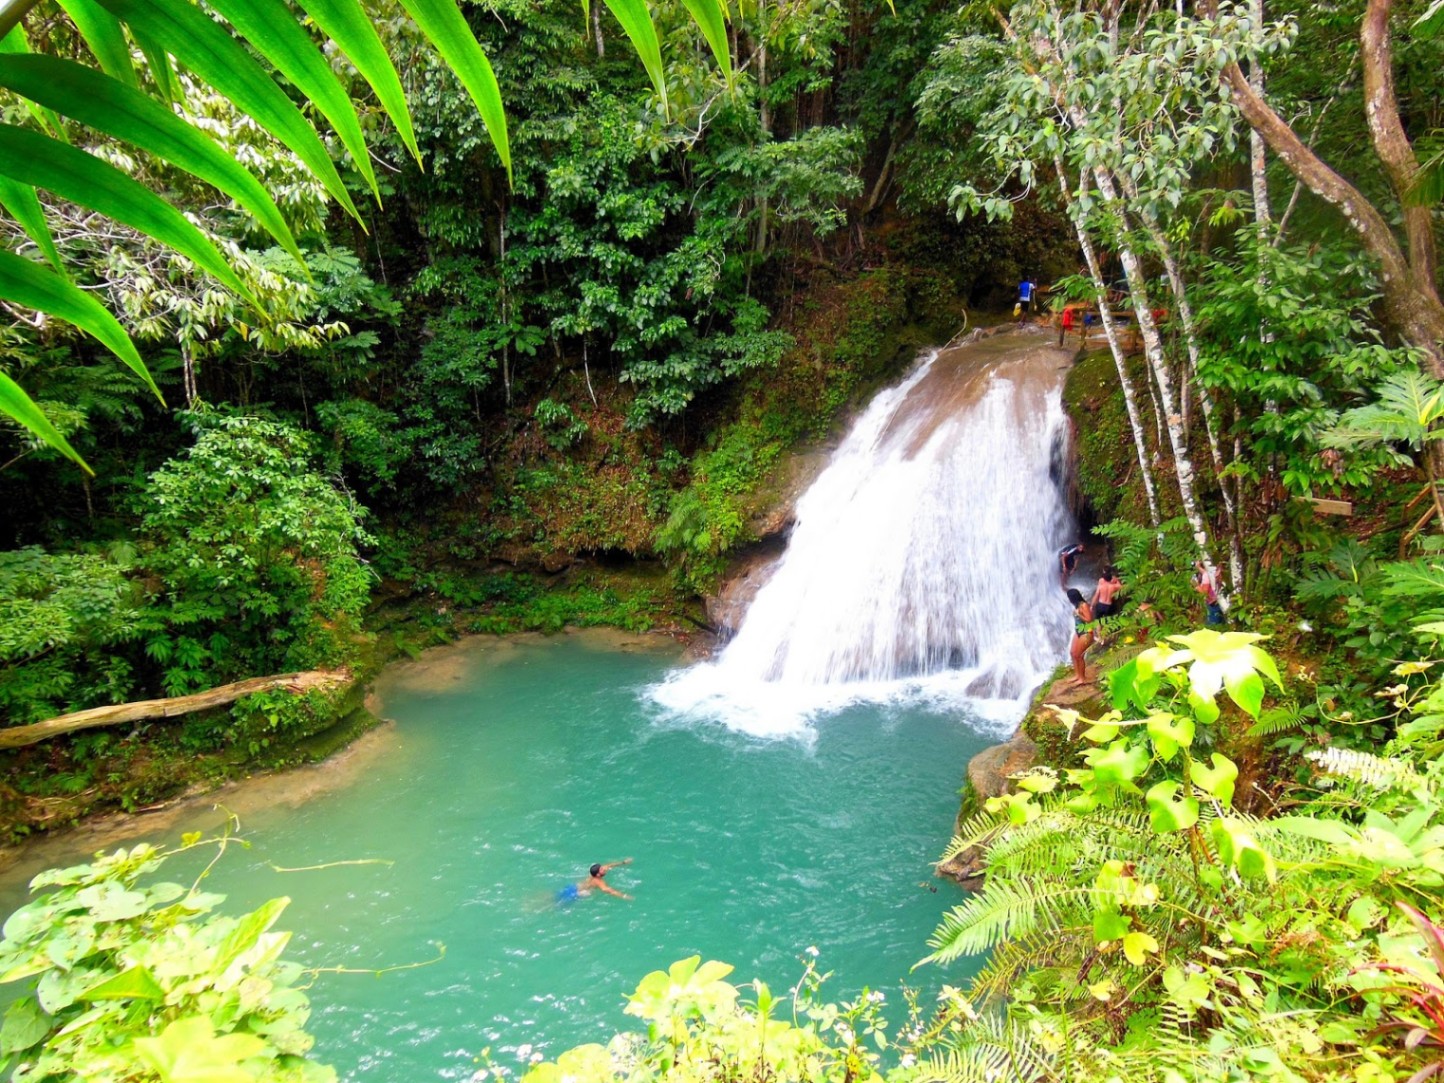 Check Out These Travel Tips To Visit Jamaica